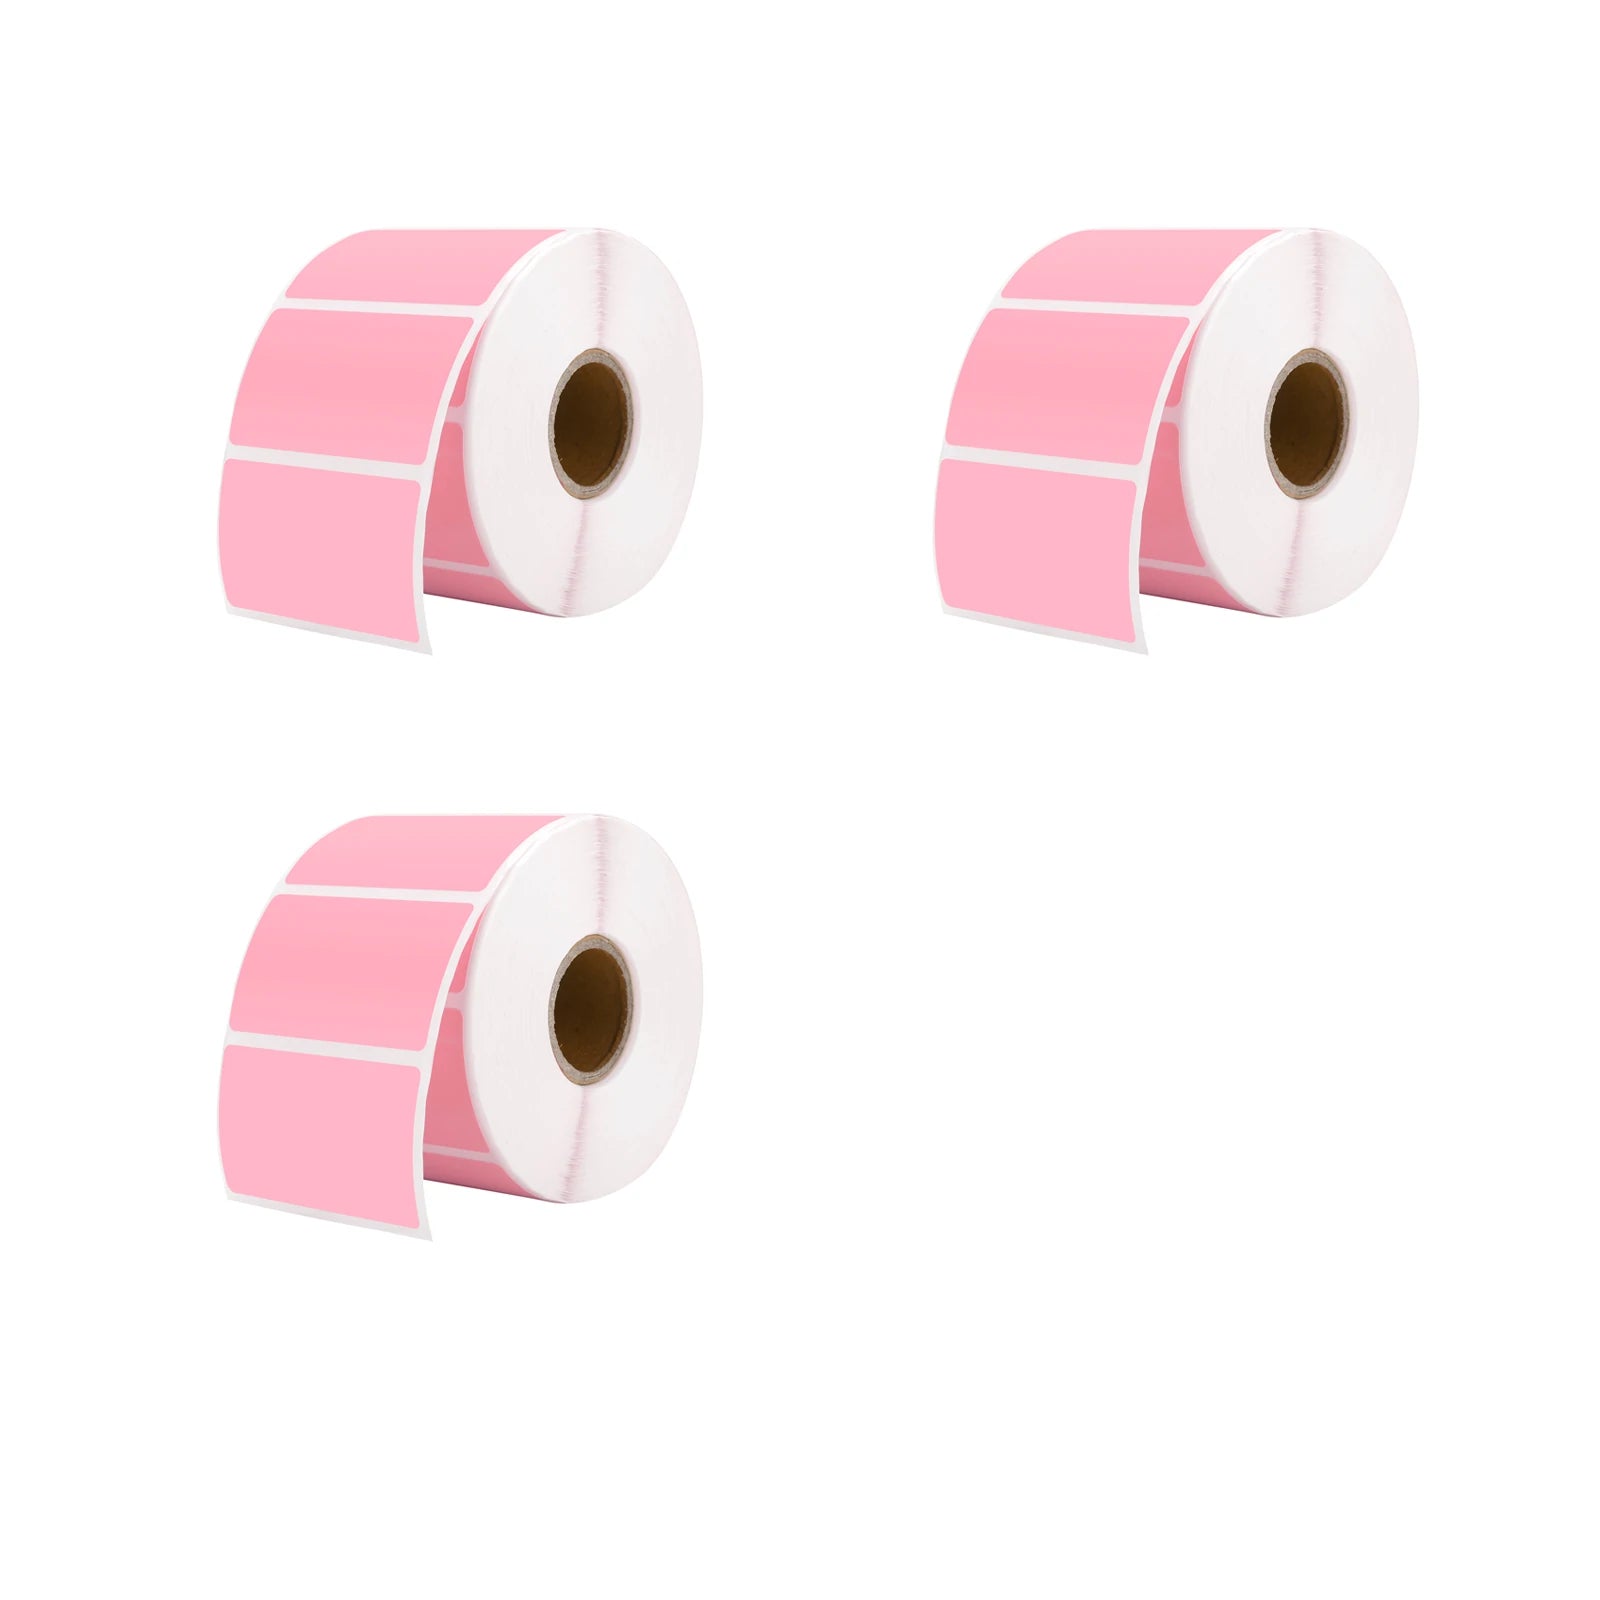 MUNBYN offers a kit containing three rolls of 57mm x 32mm pink rectangle thermal label stickers.